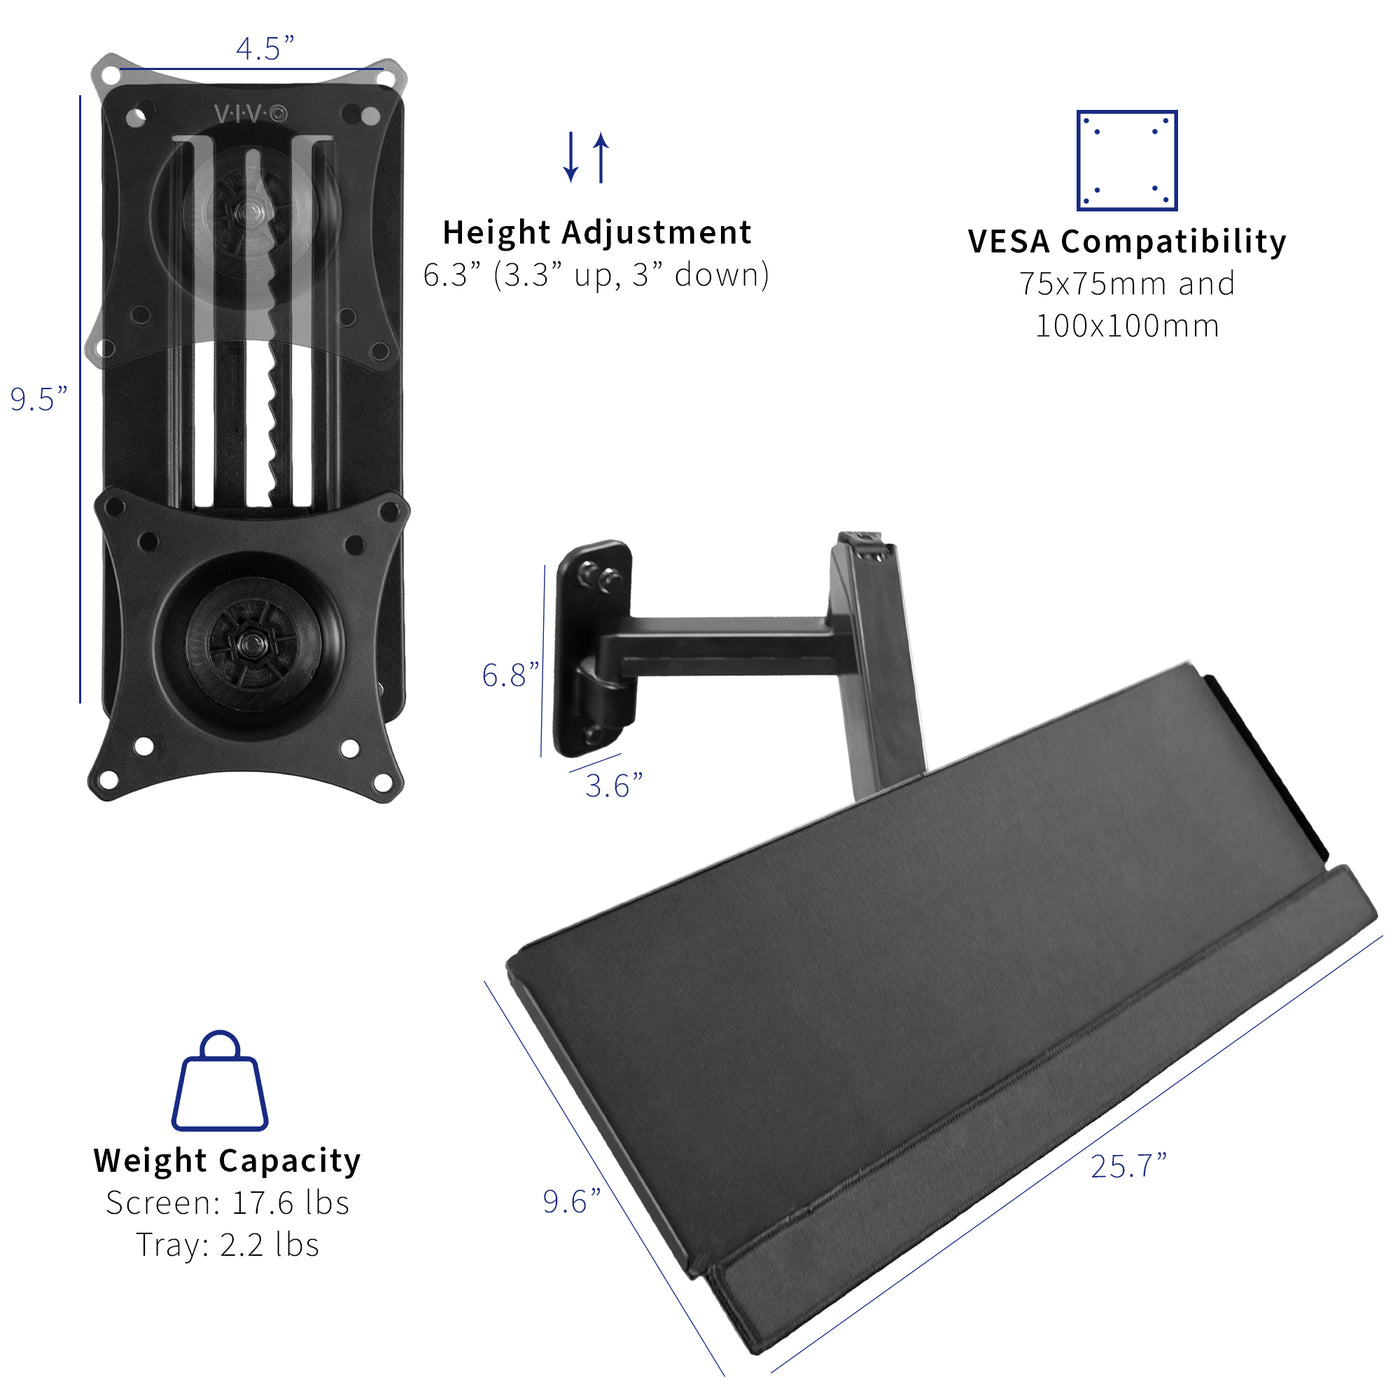 Standard VESA compatibility is provided with the monitor wall mount and dimensions of the keyboard tray.